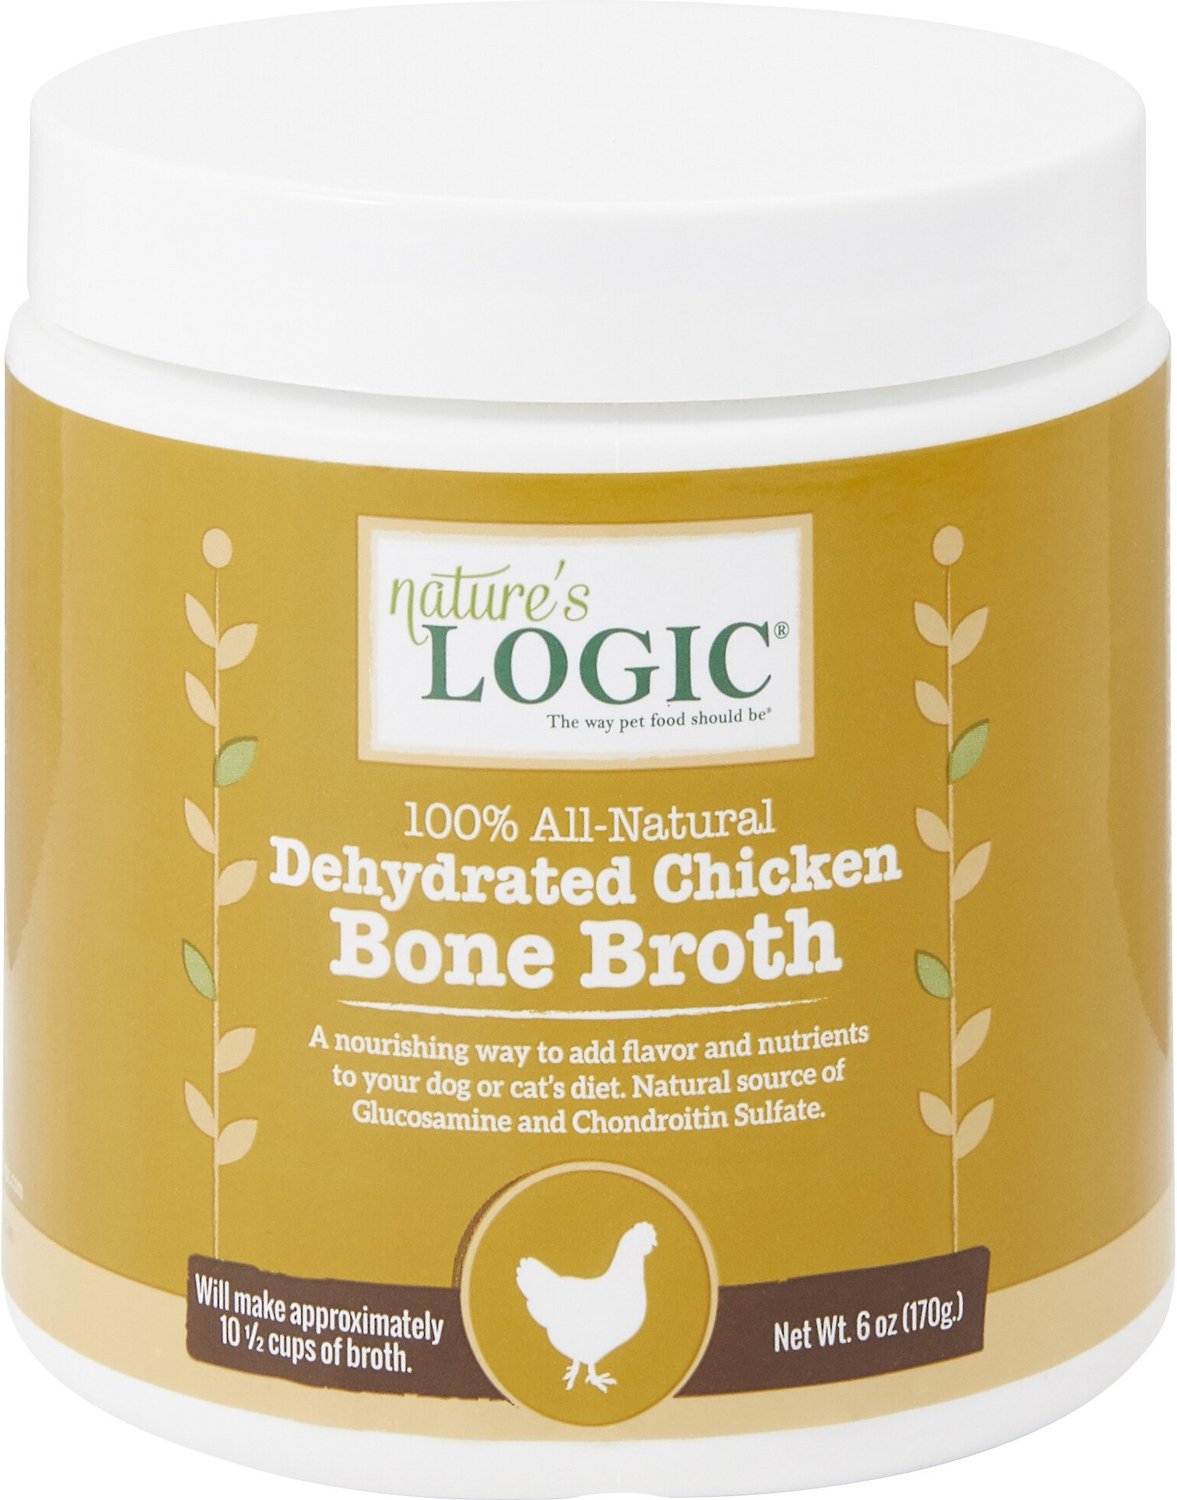 Nature's Logic Dehydrated Chicken Bone Broth for Dogs & Cats, 6oz tub